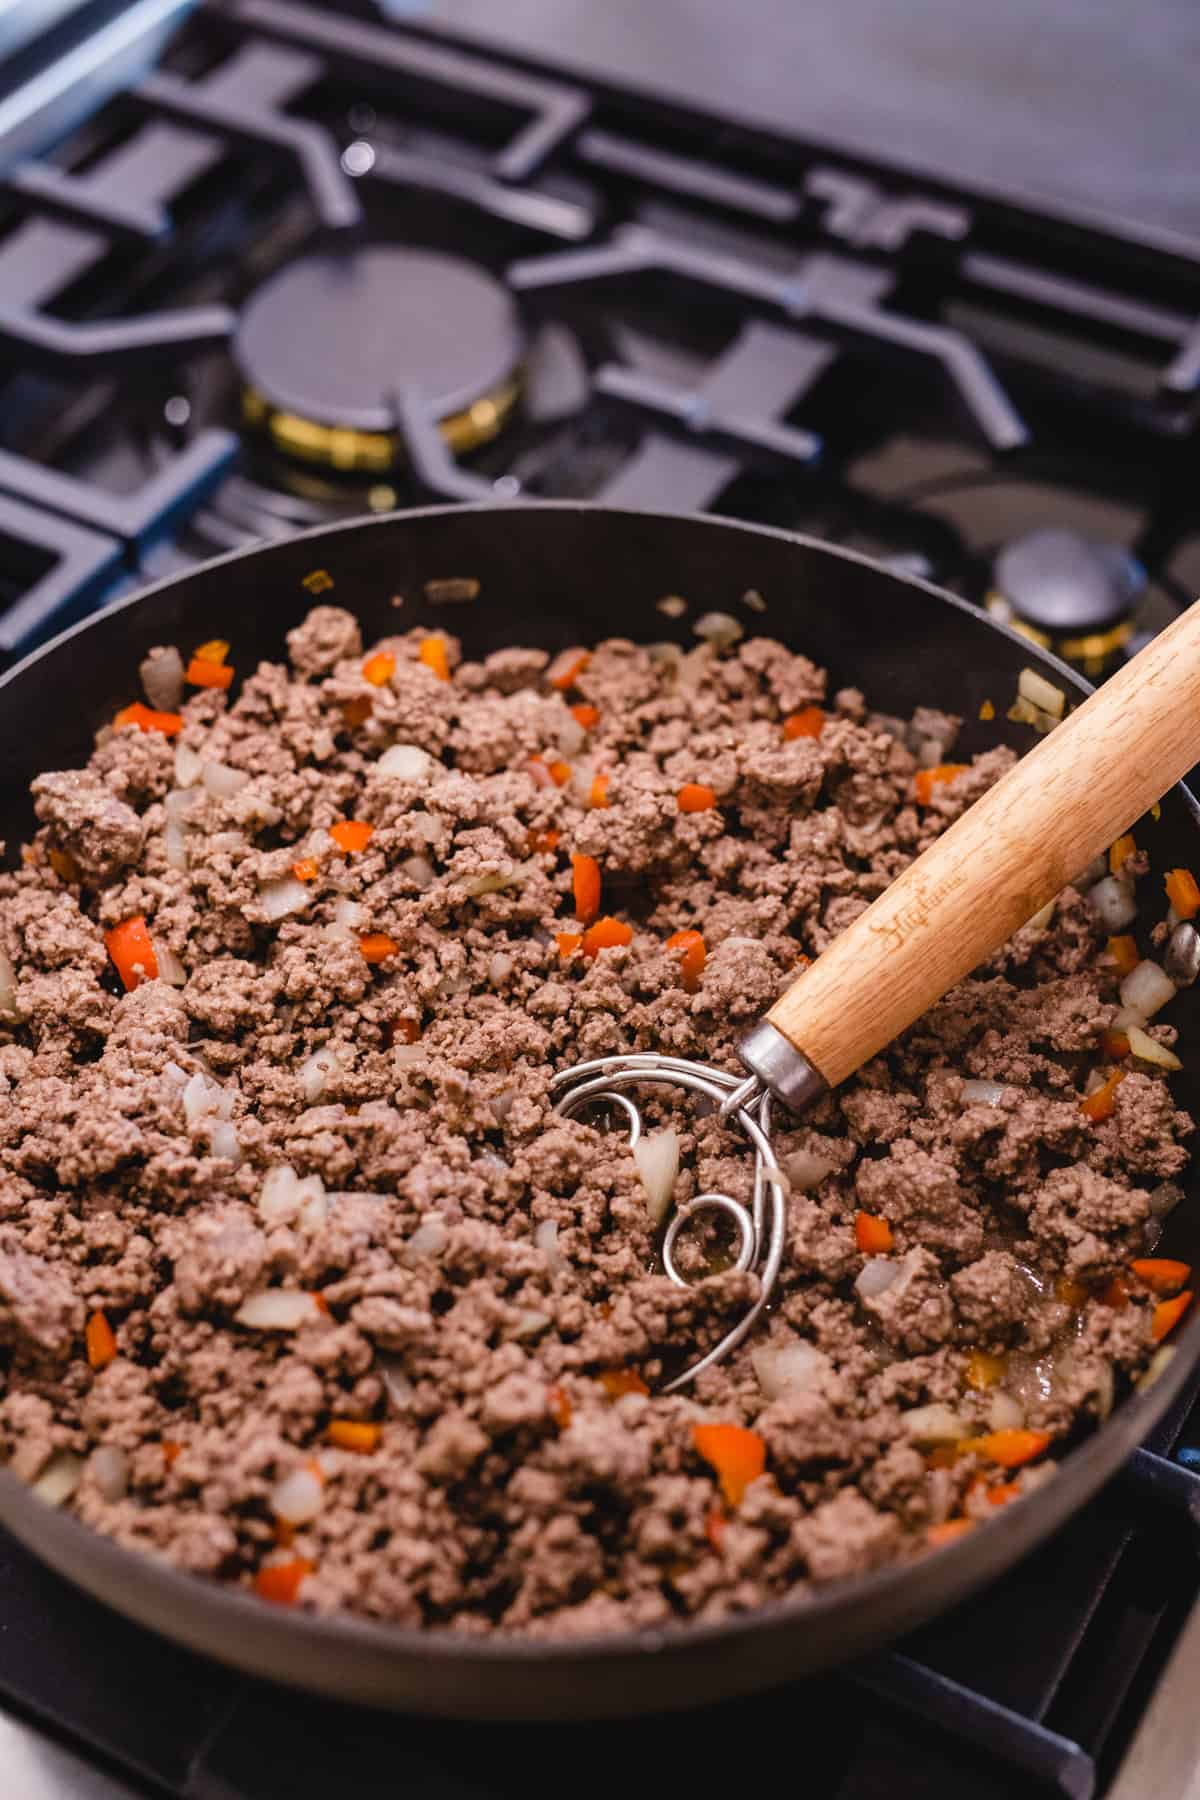 Cooked ground beef sits in a pan on a stove top.